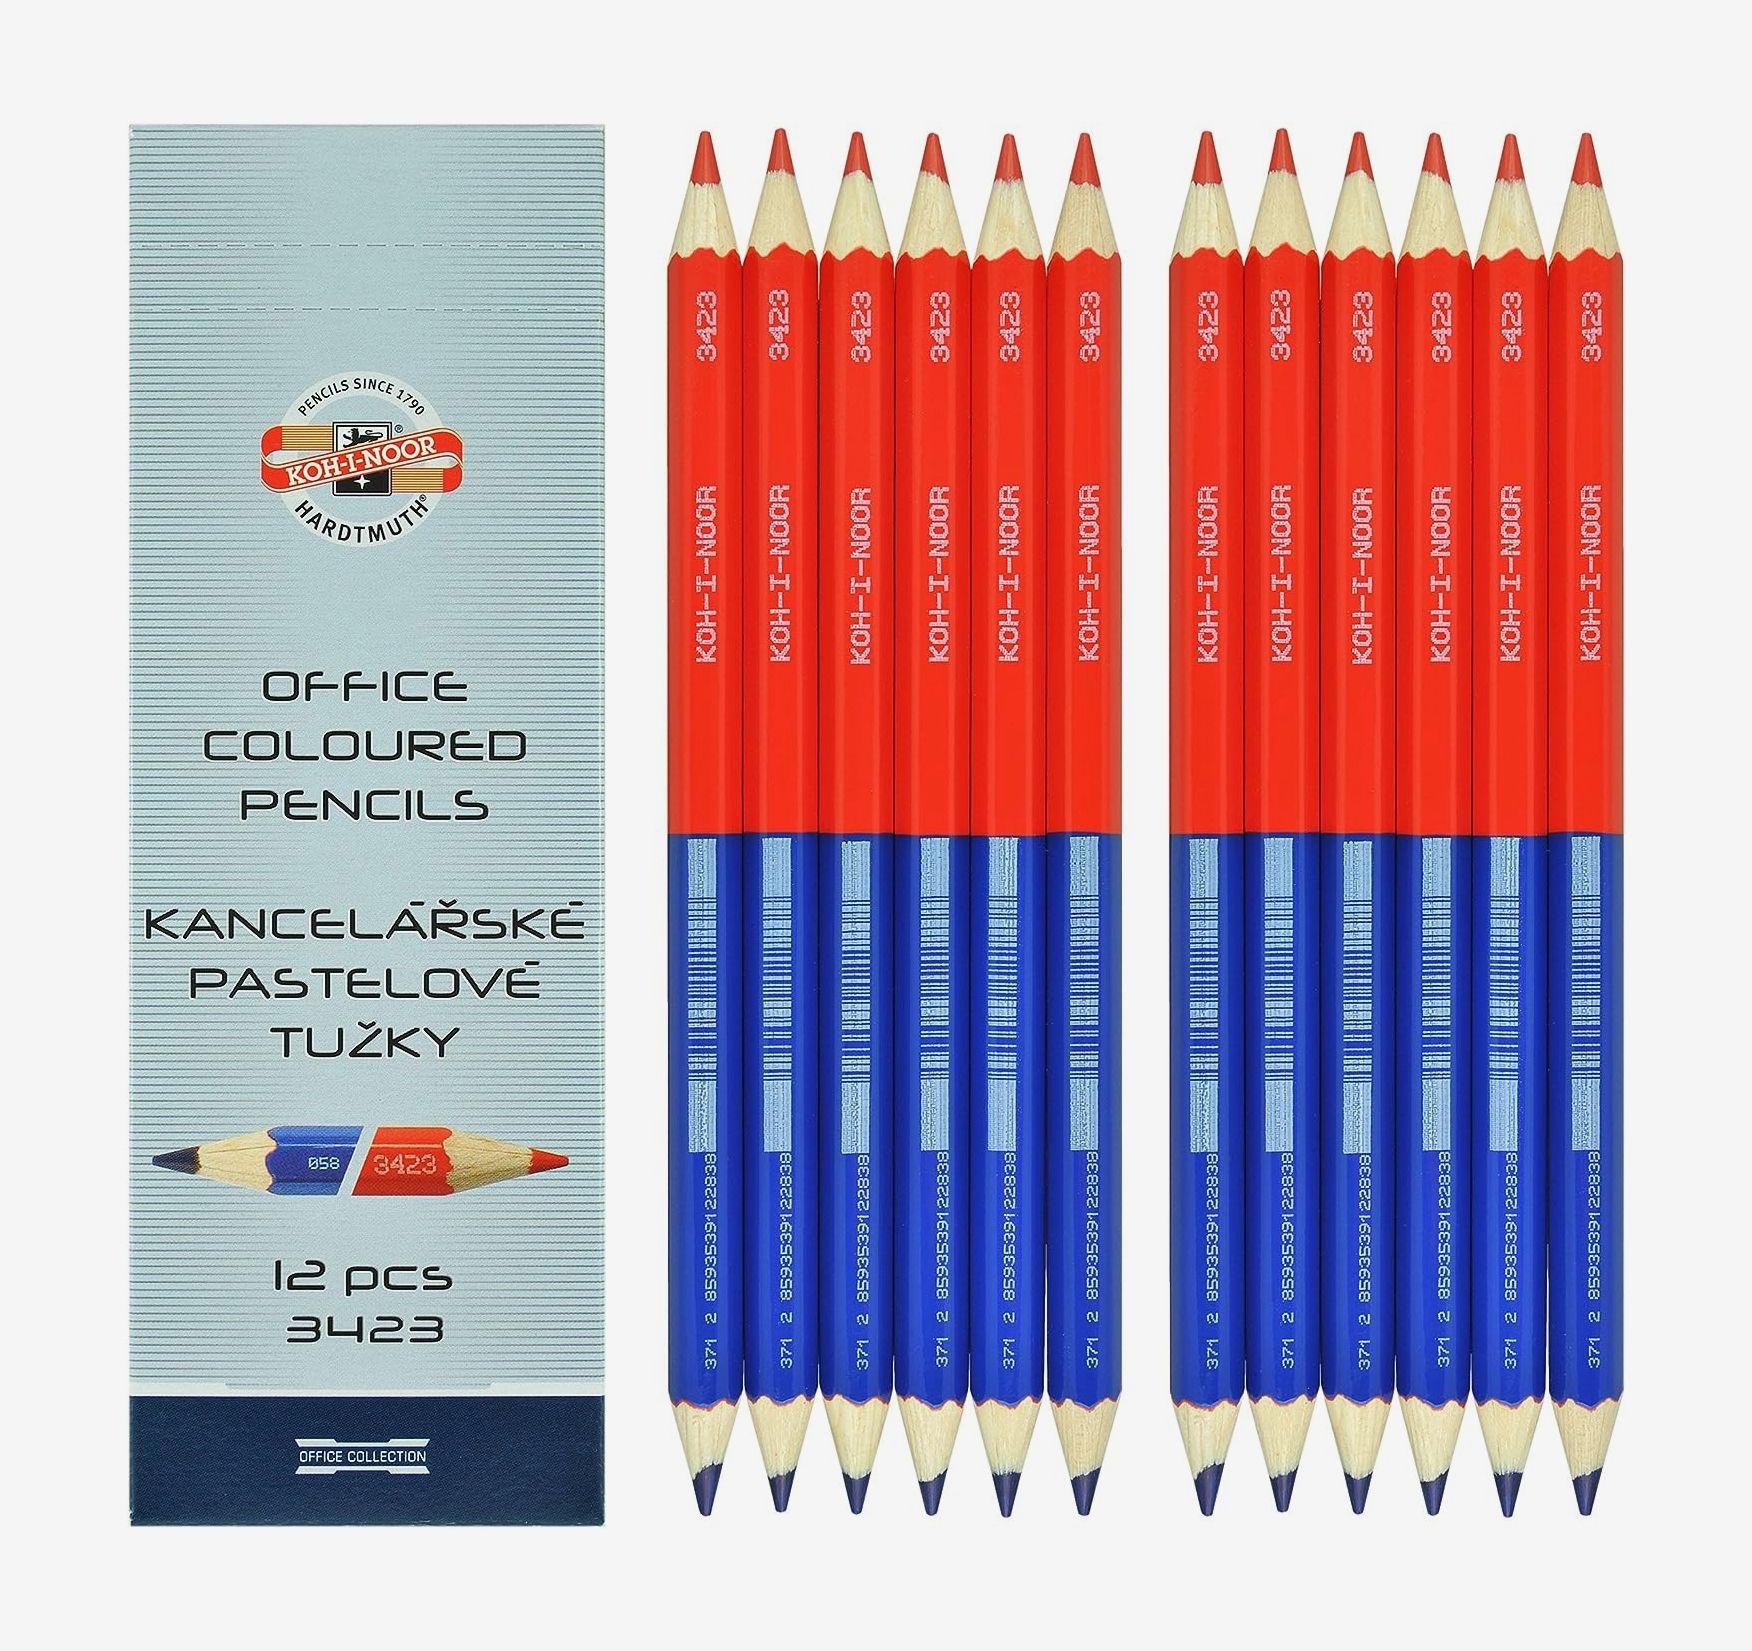 What Are The Best Colored Pencils? [8 Top Brands Compared] – ColorIt